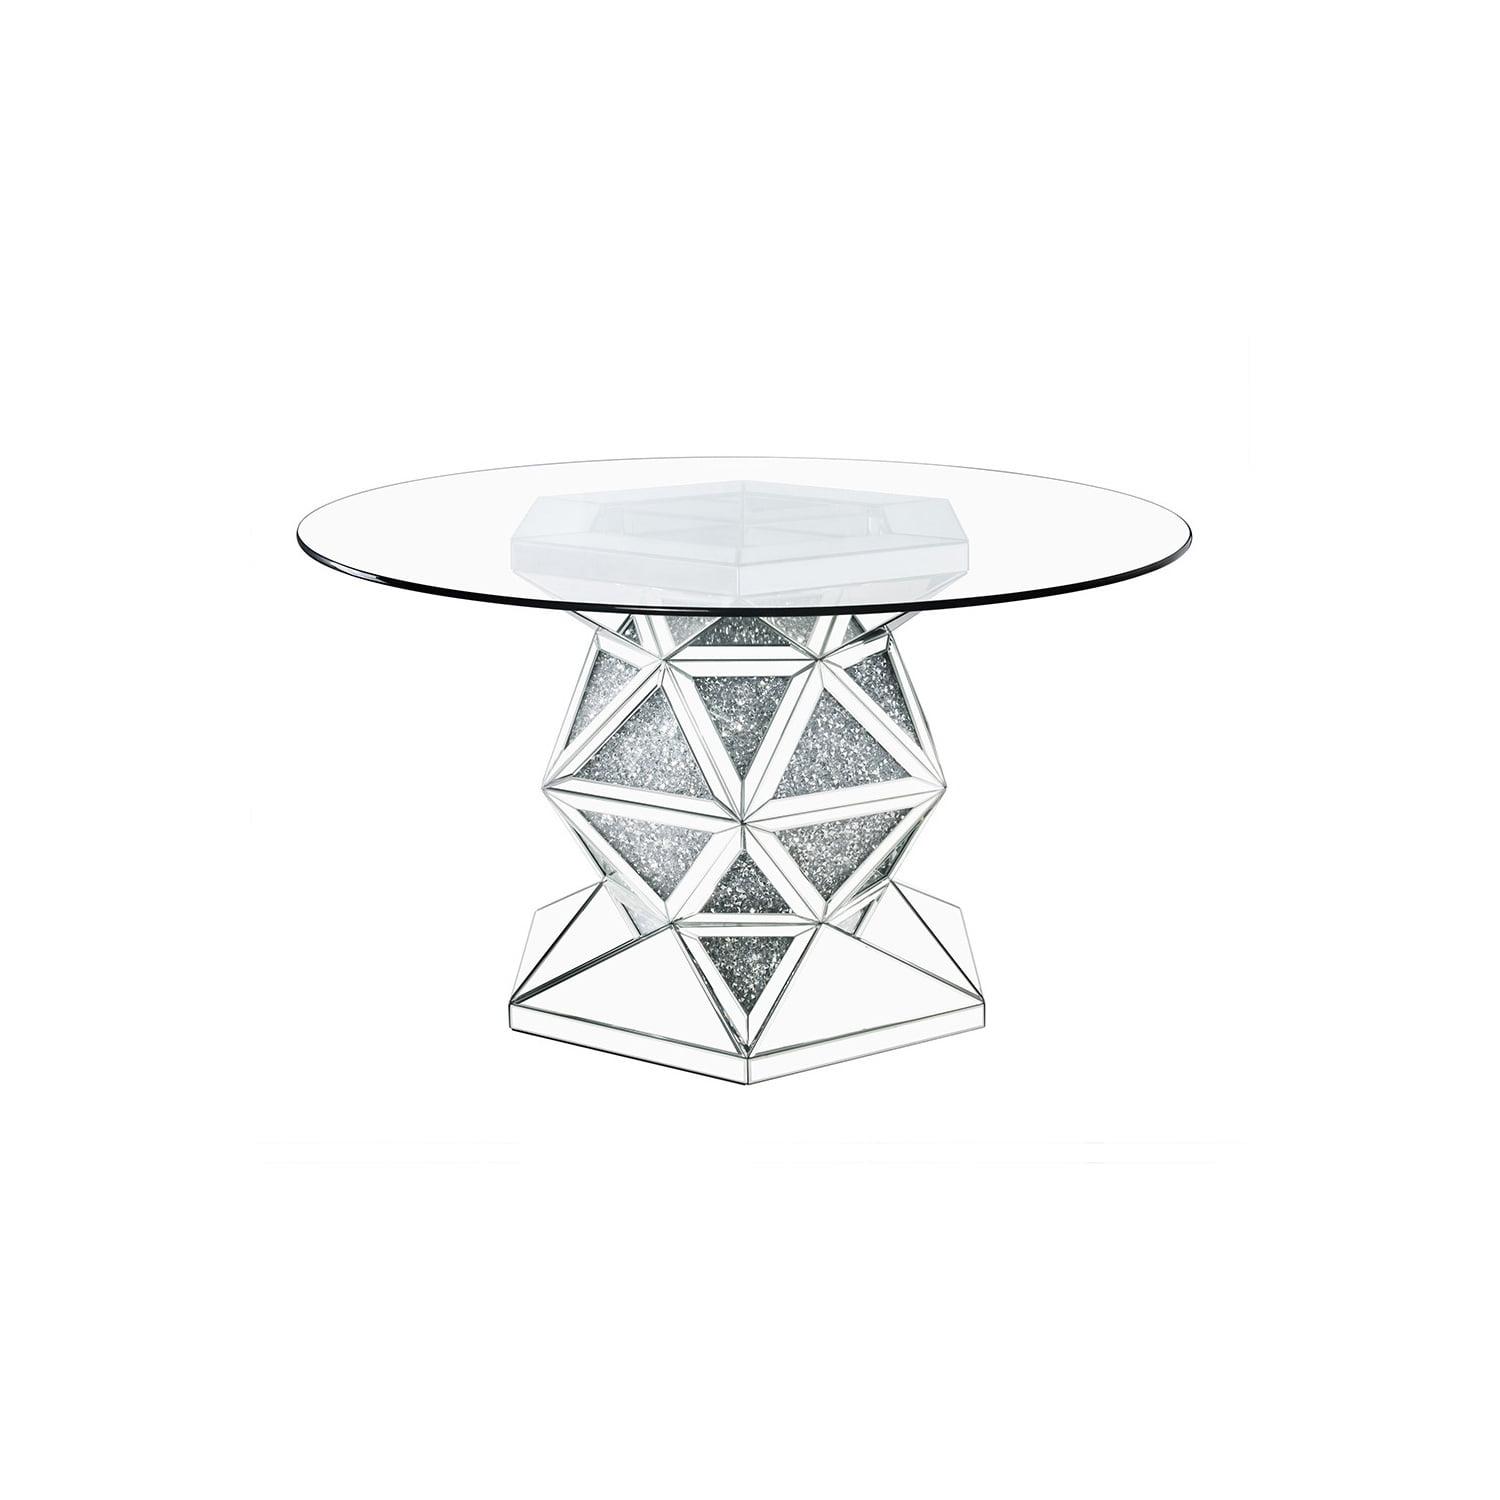 Contemporary 52" Round Wood & Glass Dining Table with Mirrored Pedestal